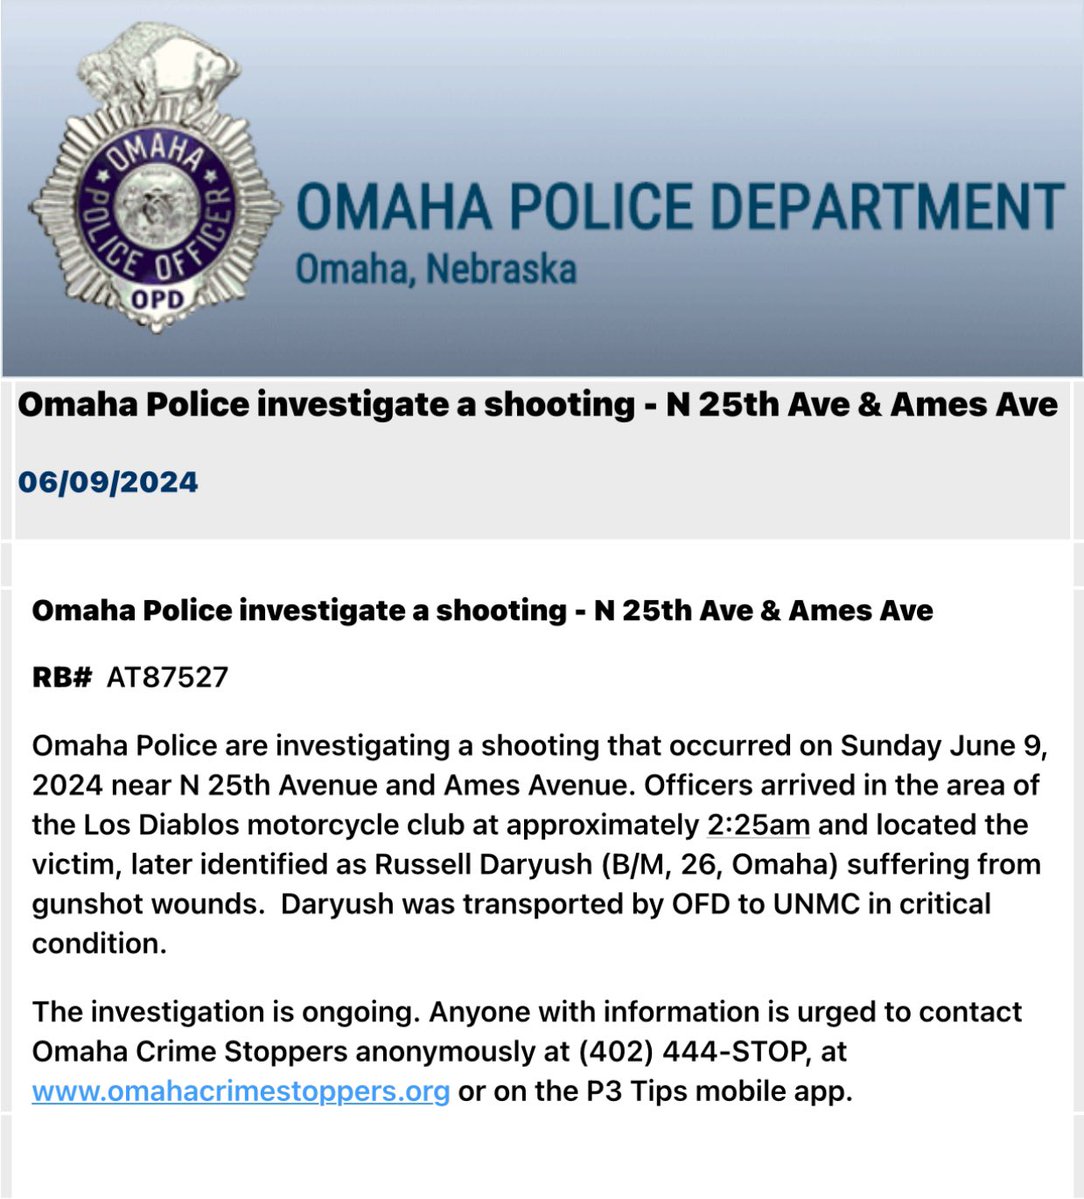 OmahaPolice investigating a shooting at 25th and Ames Ave this morning around 2:25 a.m. One victim was transported with critical injuries.